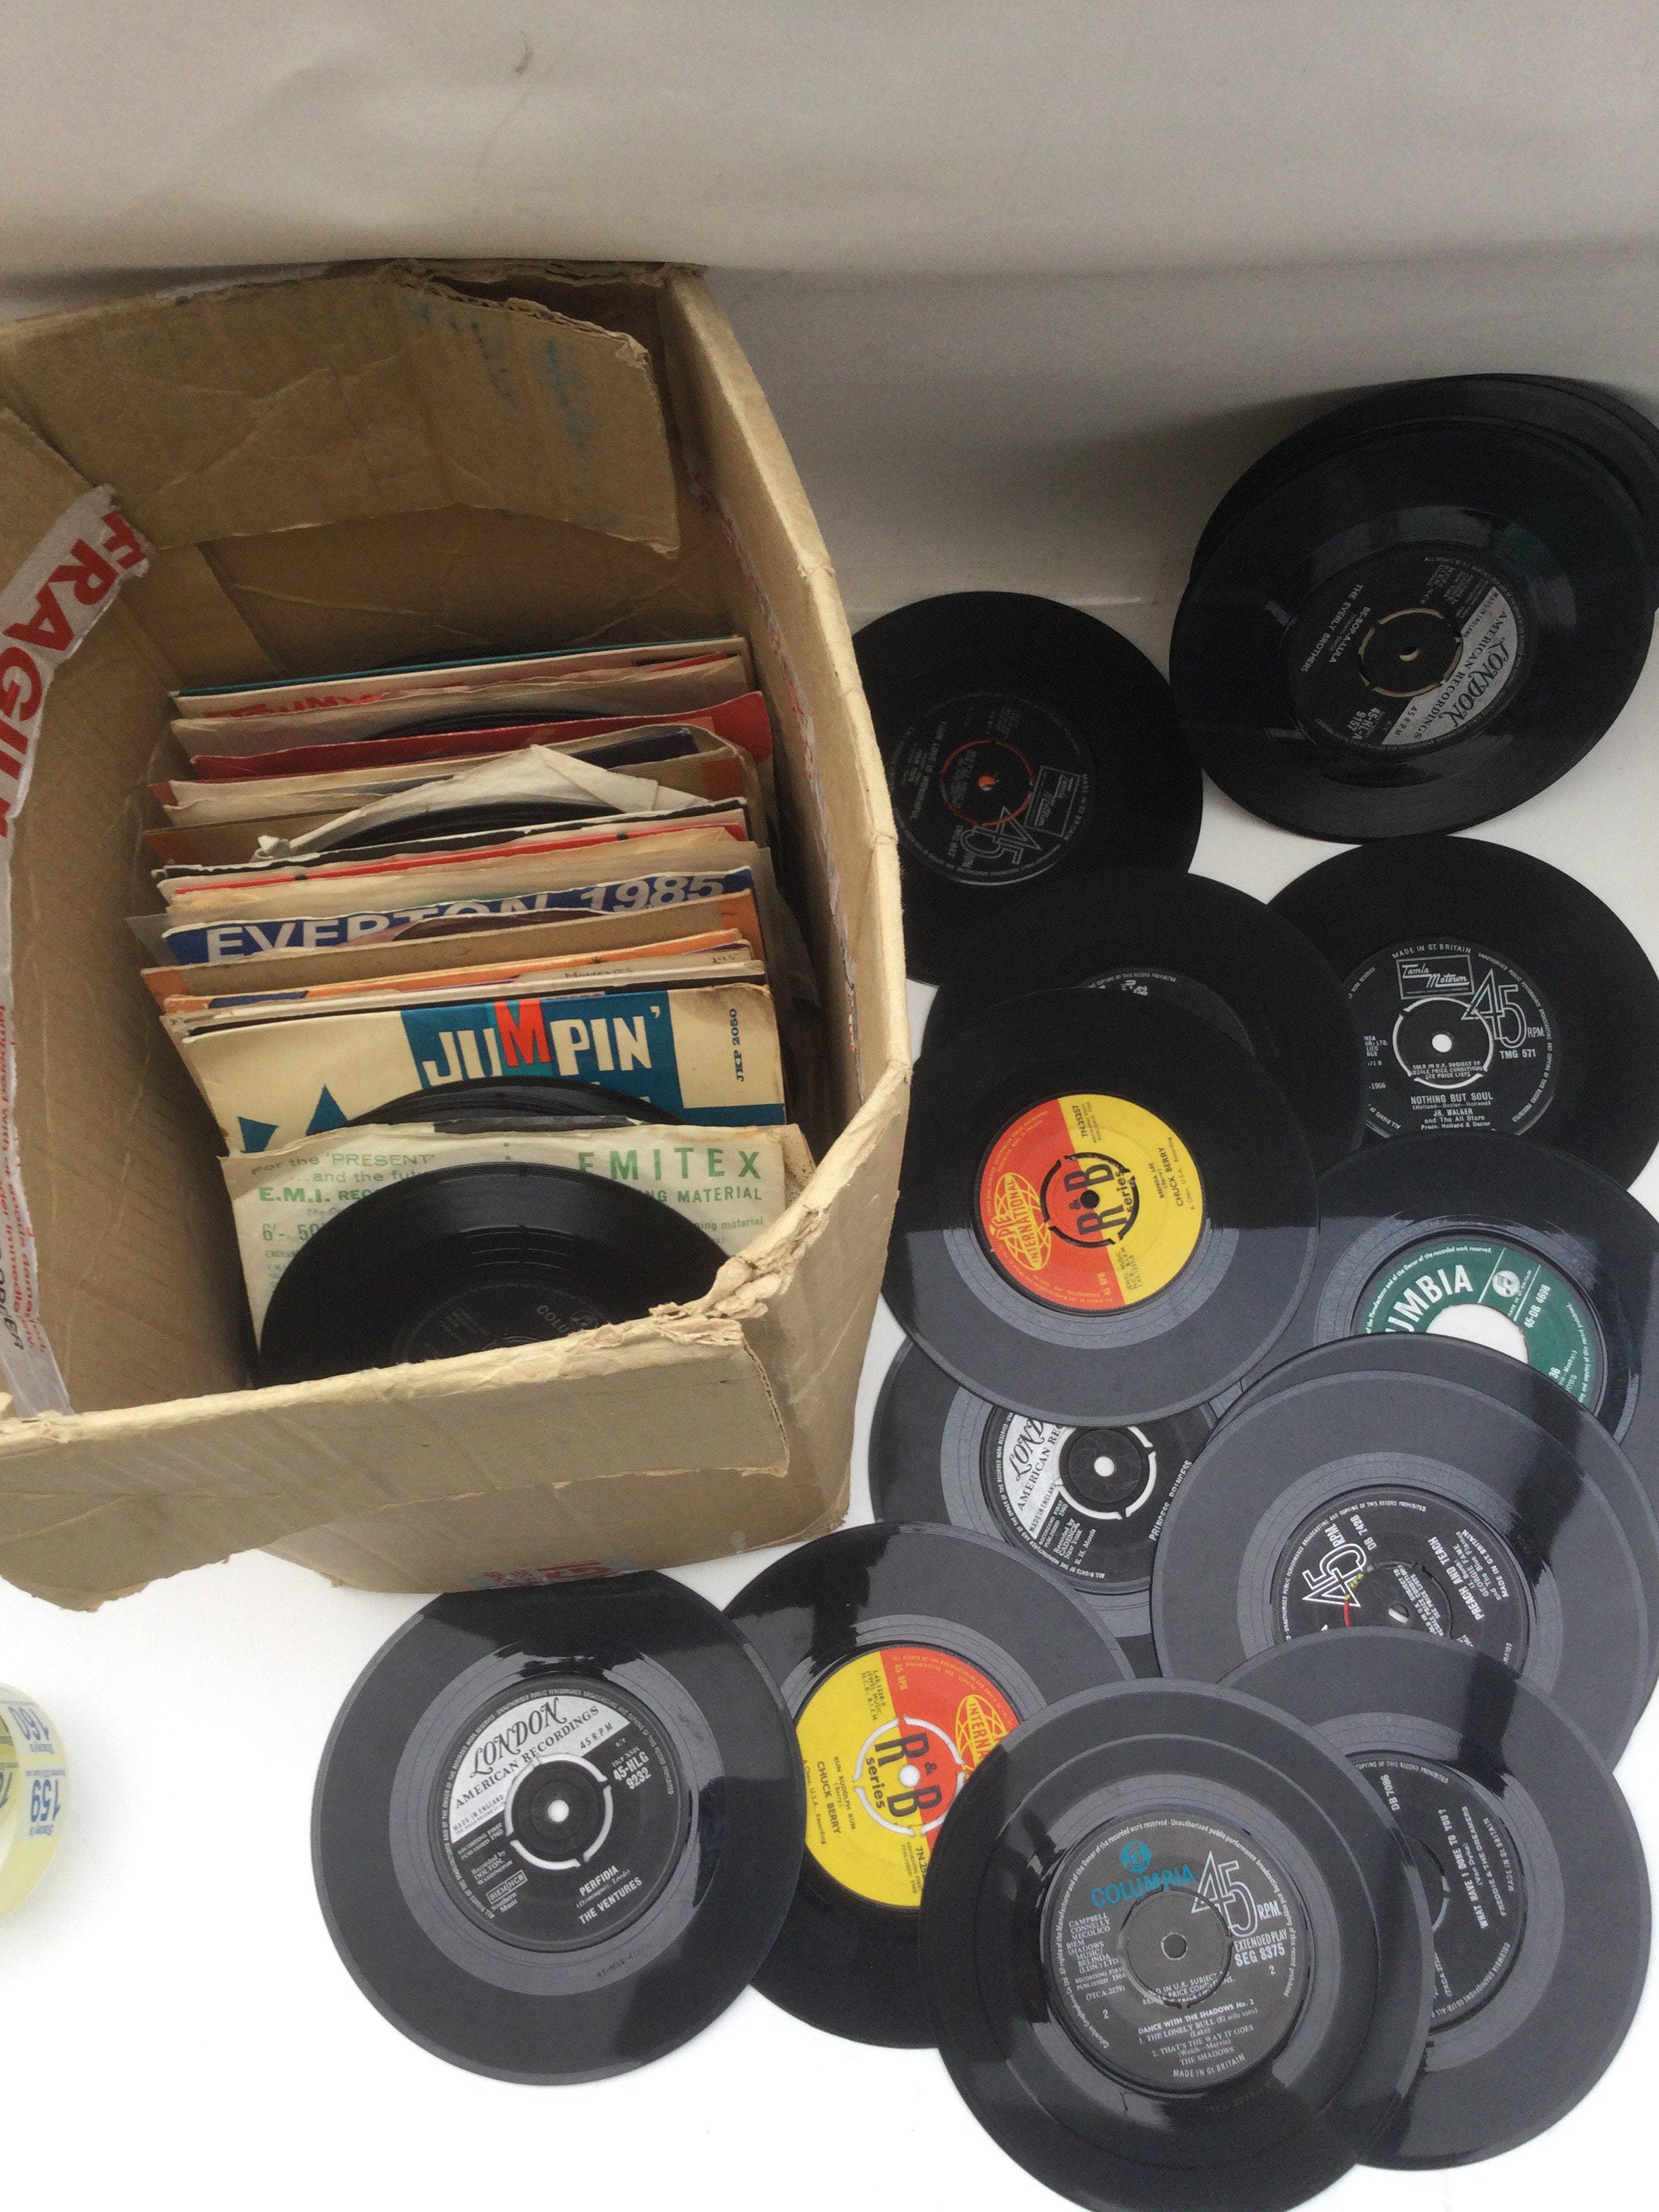 A box of 7inch singles and EPs by artists from the - Image 2 of 2